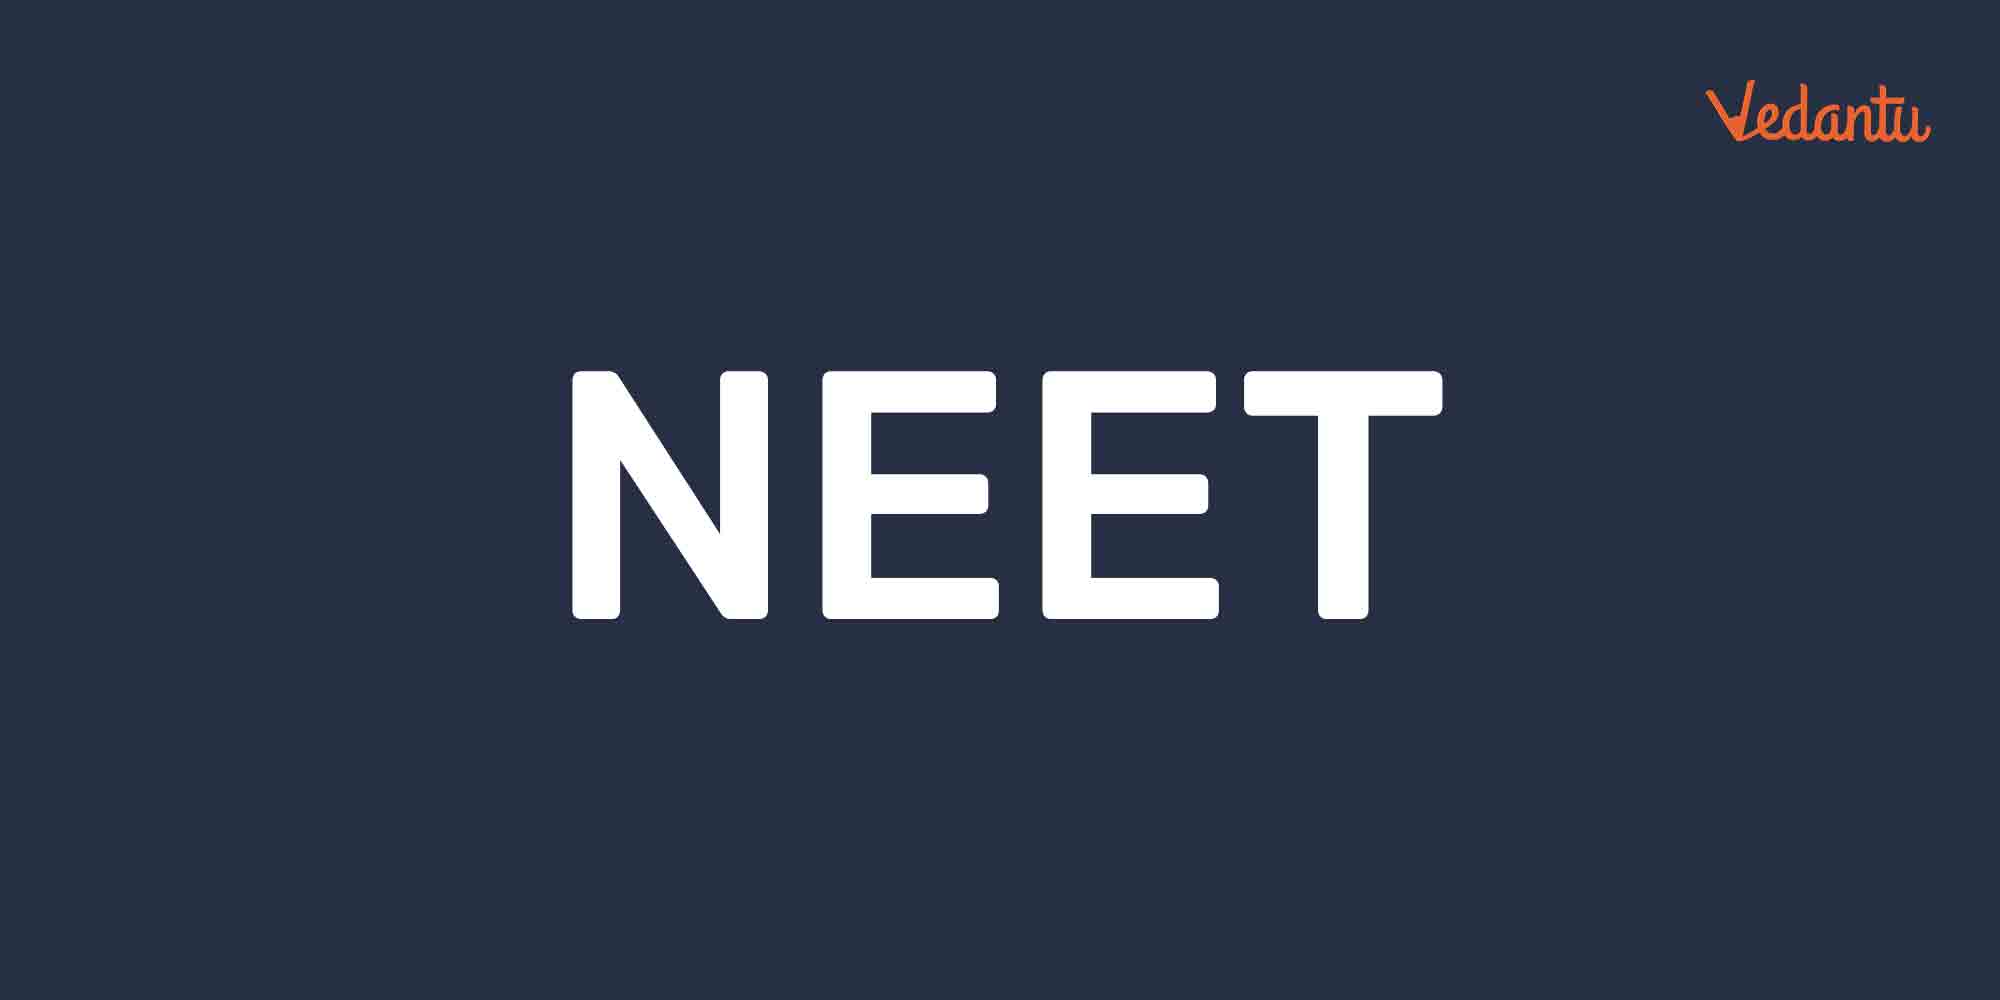 How Many Chemistry Questions in NEET Come From NCERT or of NCERT Type?